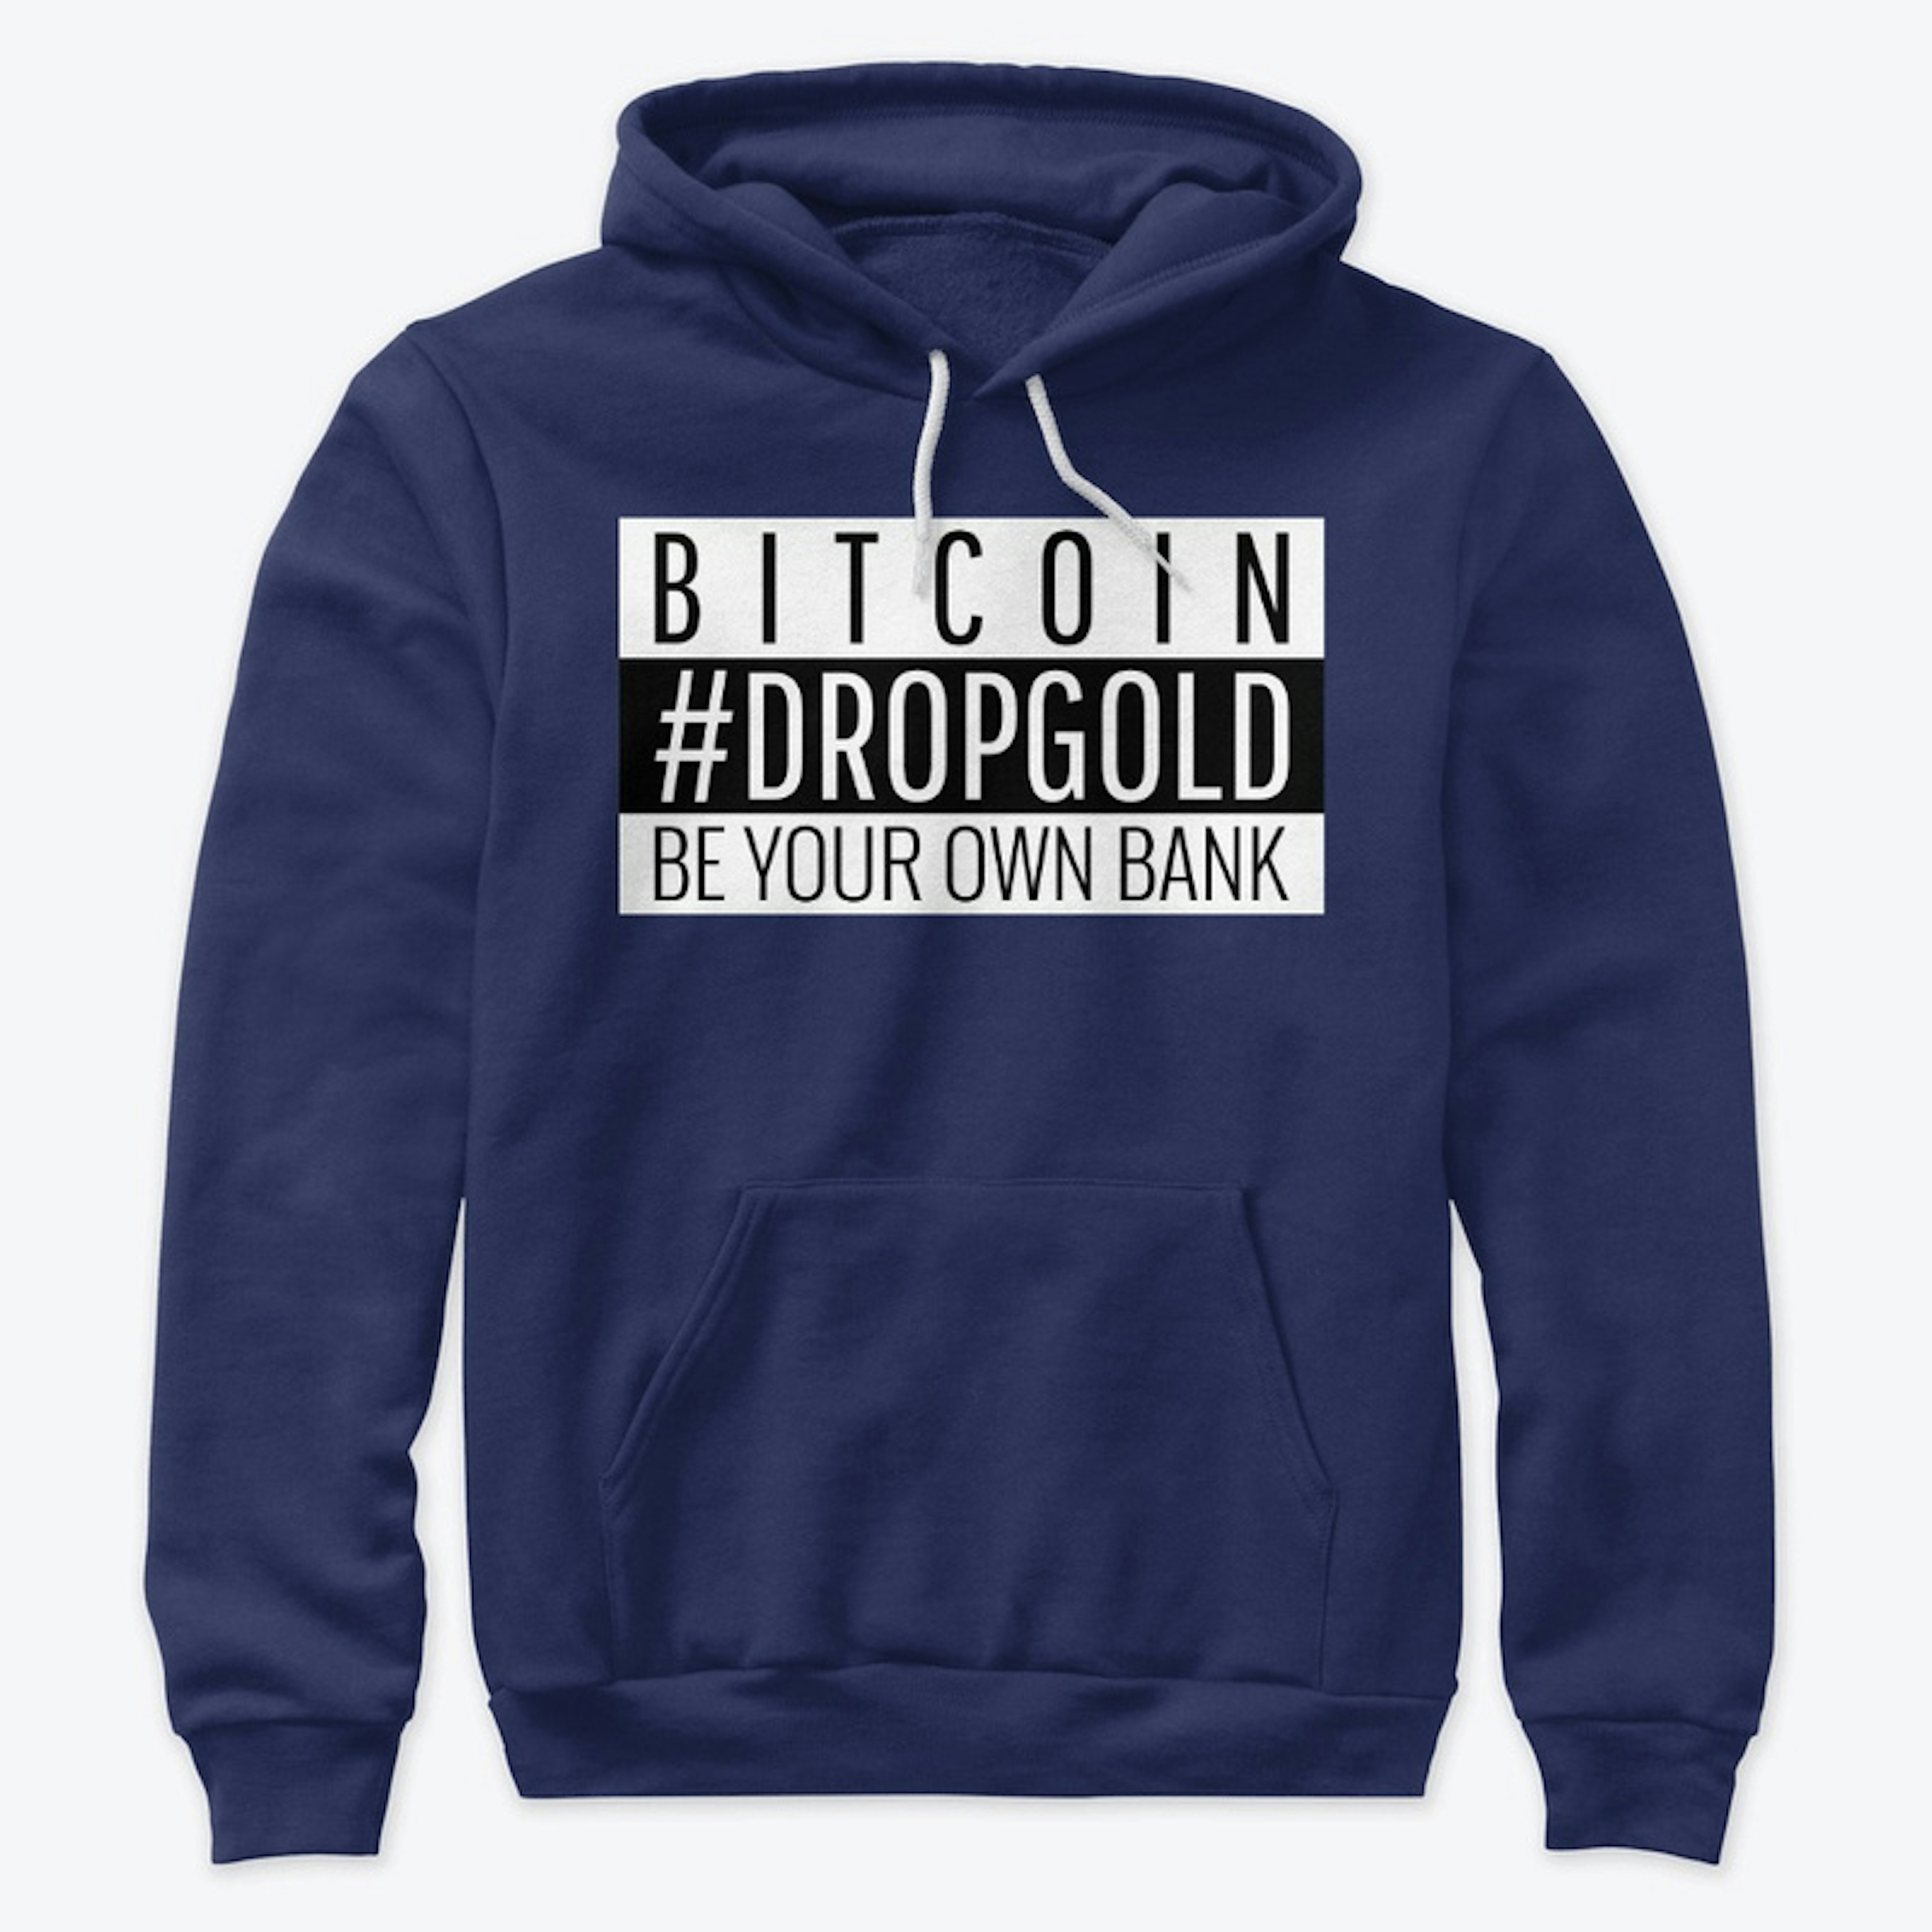 BITCOIN #DROPGOLD BE YOUR OWN BANK